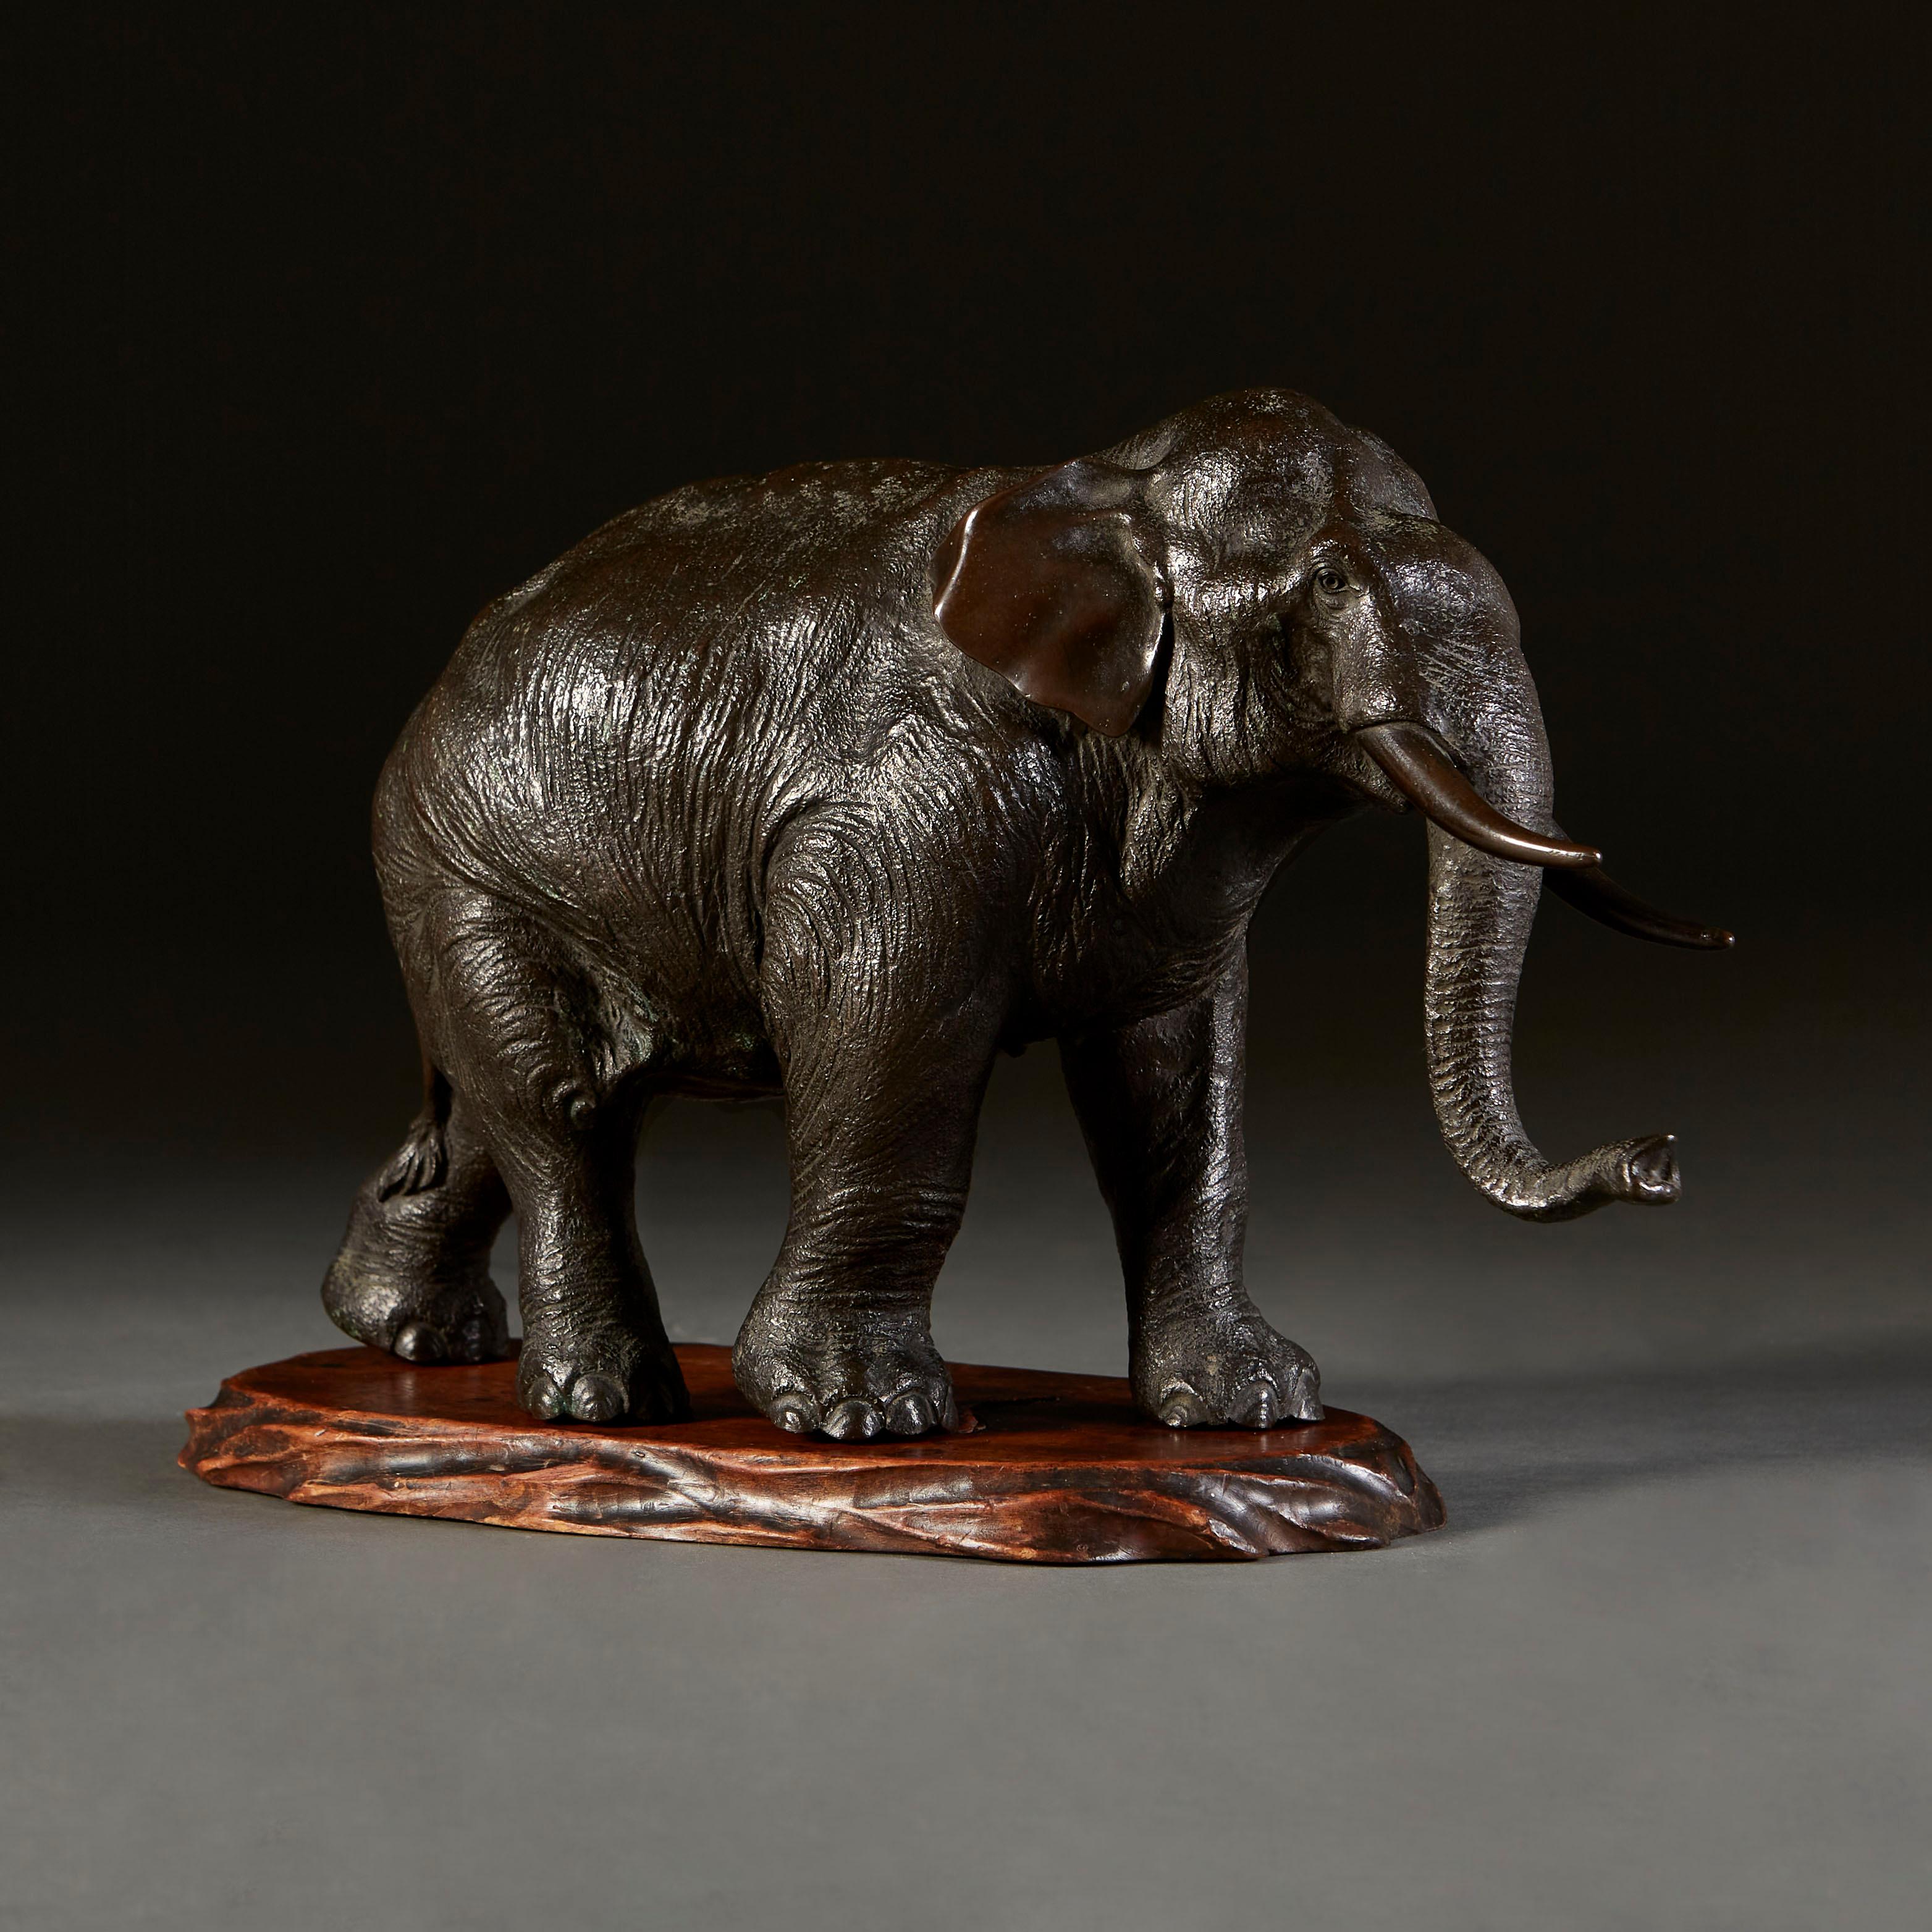 A mid nineteenth century Japanese bronze okimono of an elephant in repose, captured striding forward calmly, with its head tilted slightly to the right. The bronze has been successfully manipulated so as to replicate both the wrinkles and thickness